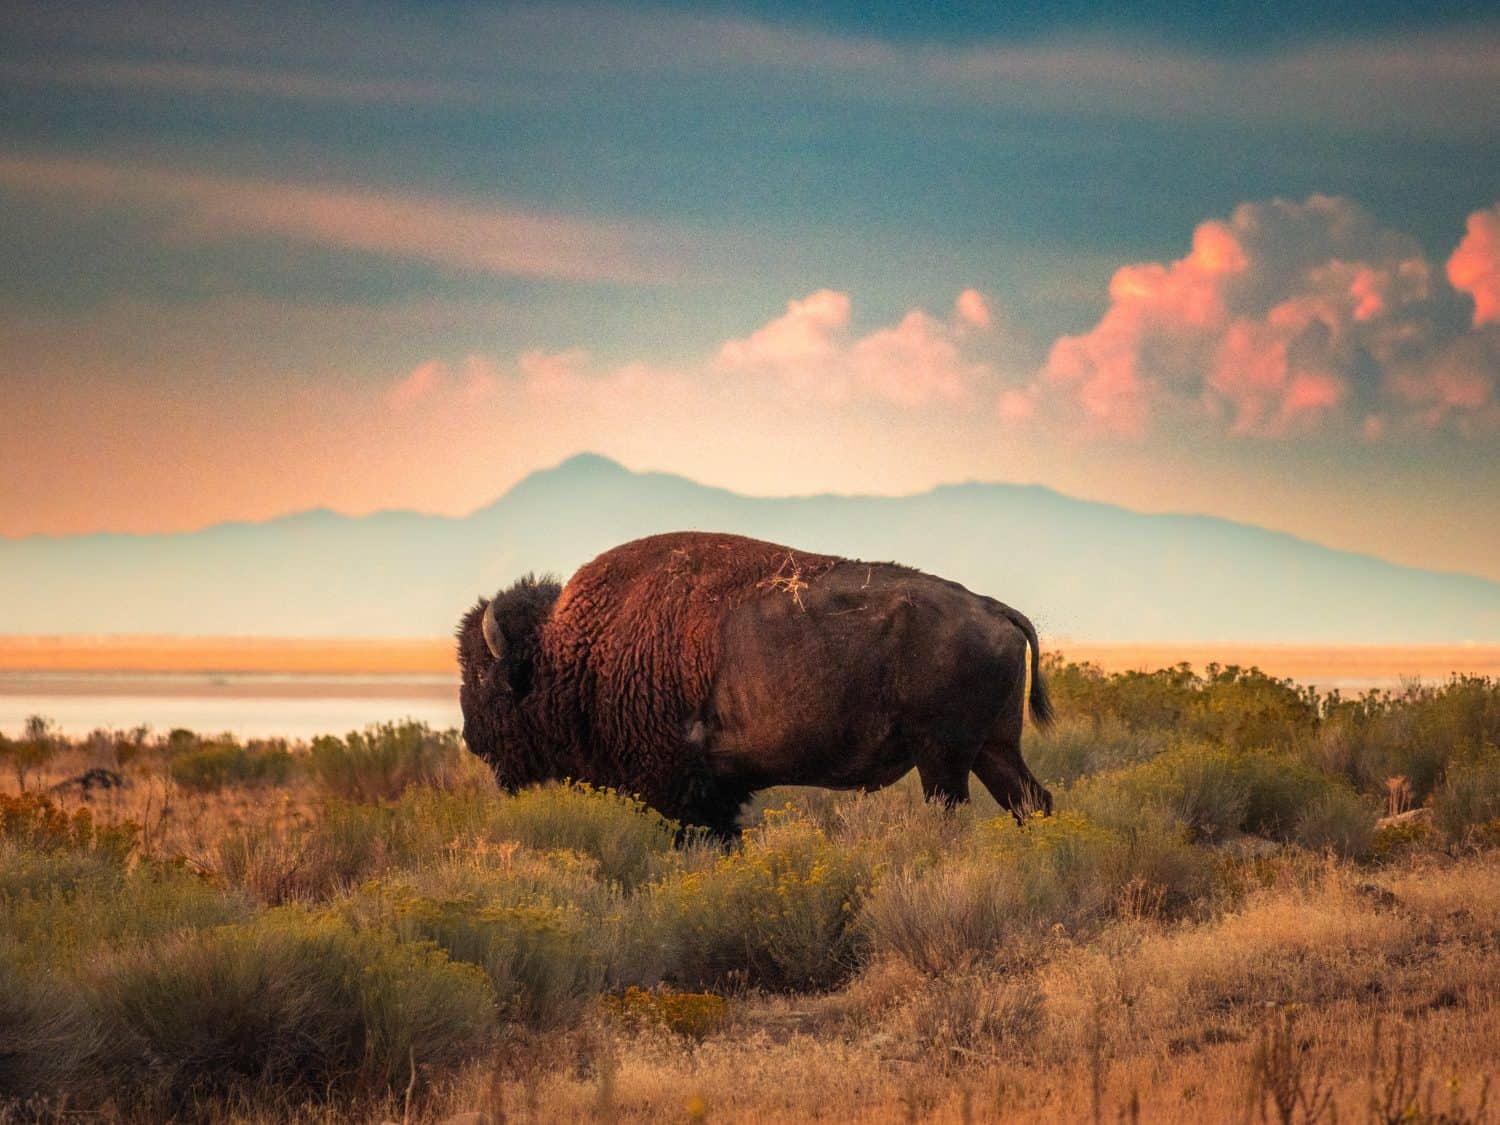 Bison on Antelope Island by the Great Salt Lake and mountains